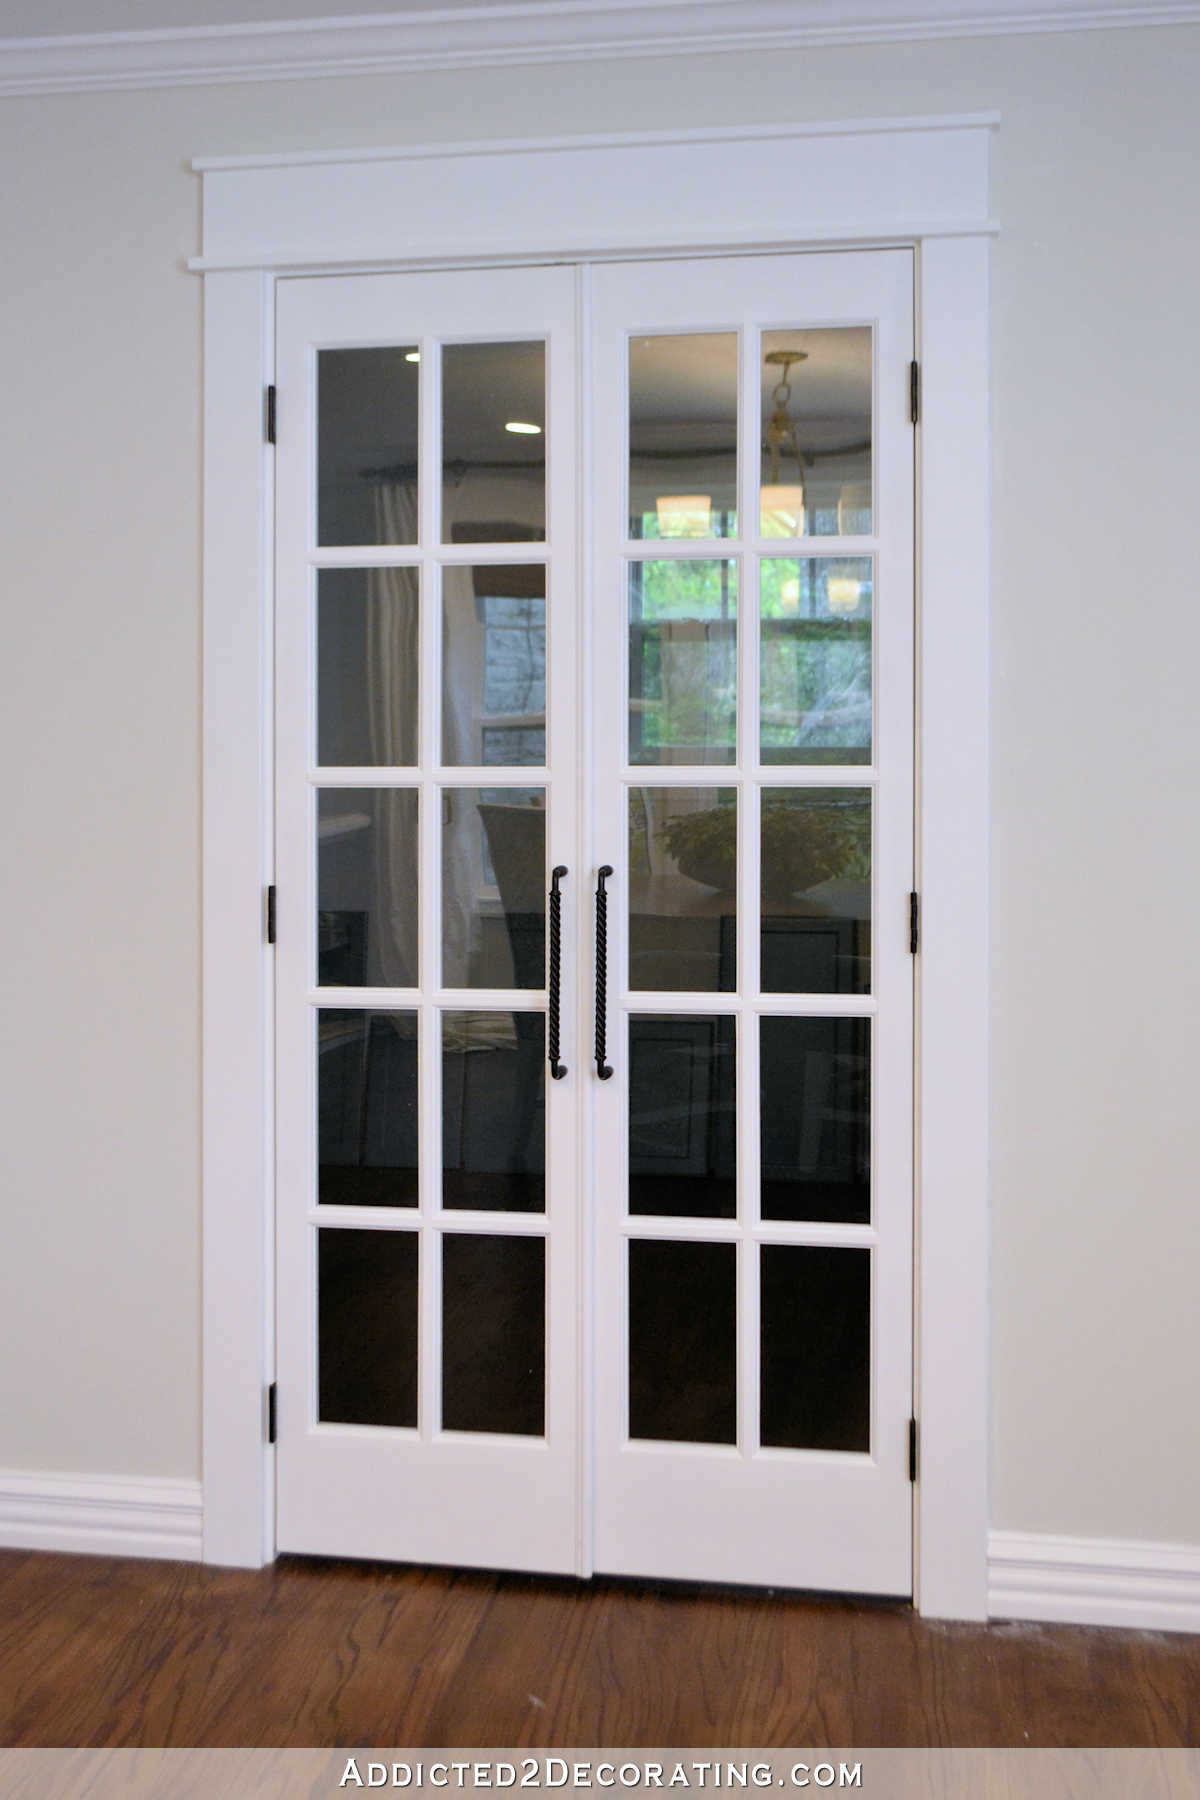 pantry french doors - 21 - finished French doors on pantry using bifold closet doors